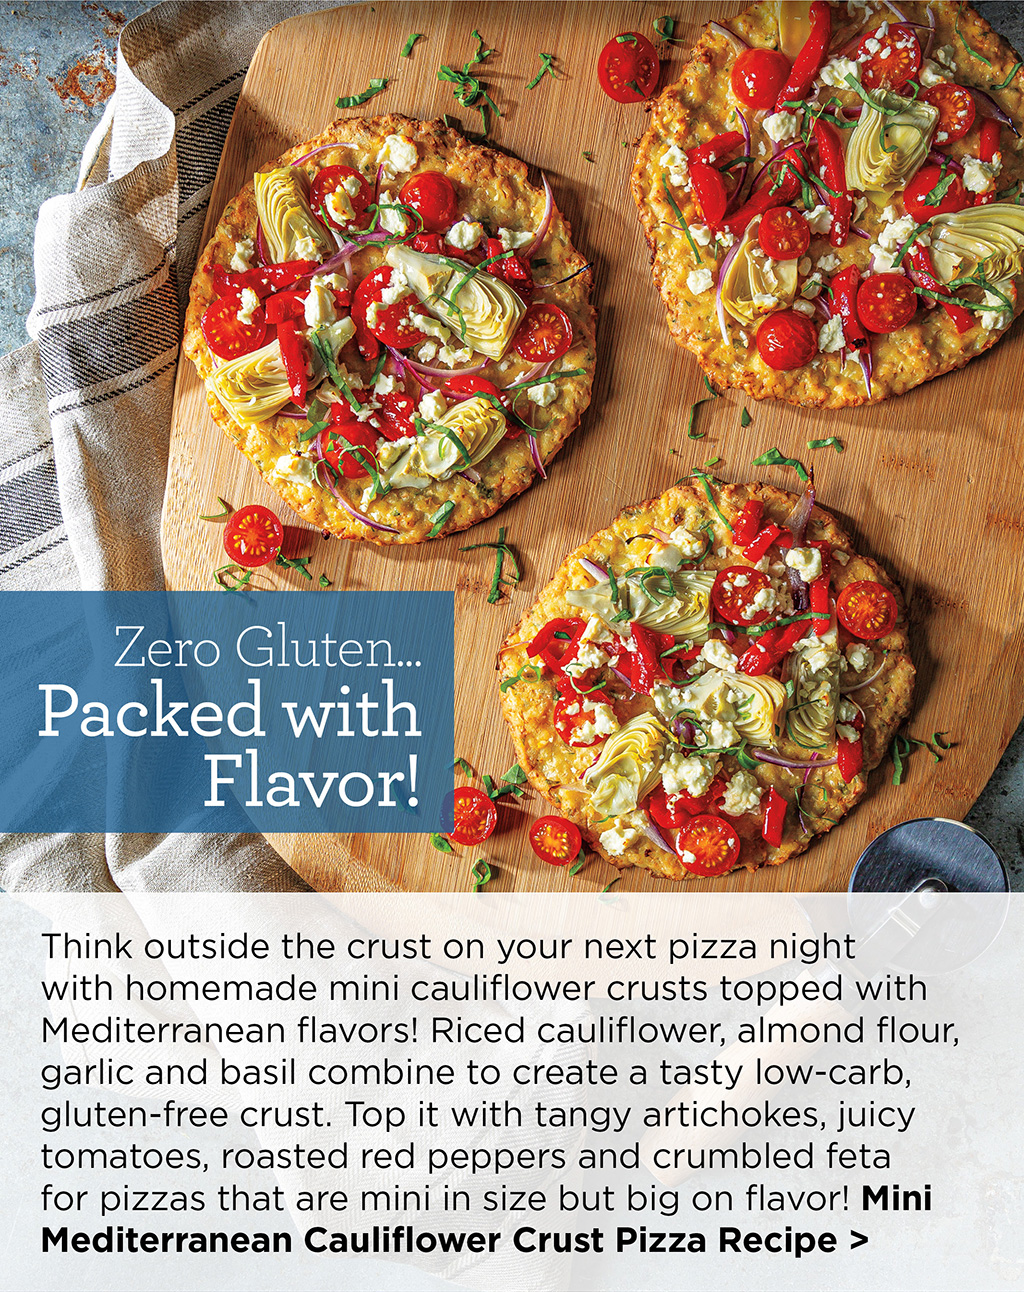 Zero Gluten... Packed with Flavor! - Think outside the crust on your next pizza night with homemade mini cauliflower crusts topped with Mediterranean flavors! Riced cauliflower, almond flour, garlic and basil combine to create a tasty low-carb, gluten-free crust. Top it with tangy artichokes, juicy tomatoes, roasted red peppers and crumbled feta for pizzas that are mini in size but big on flavor! Mini Mediterranean Cauliflower Crust Pizza Recipe >